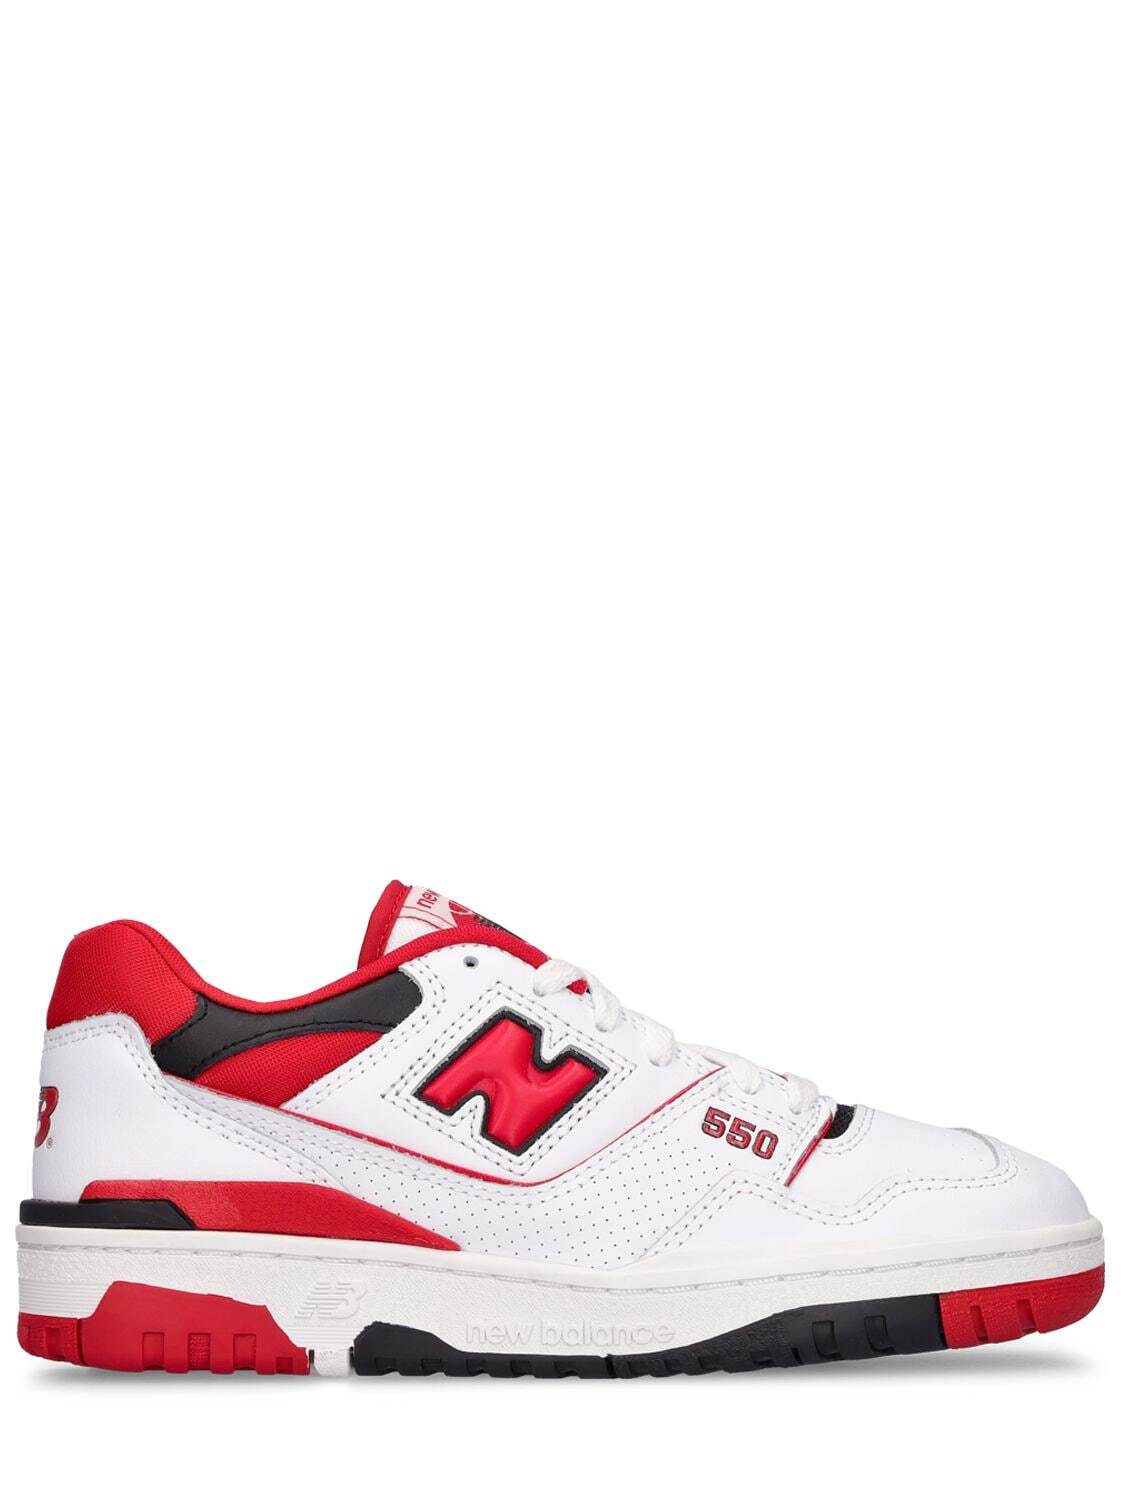 NEW BALANCE 550 Sneakers in red / white